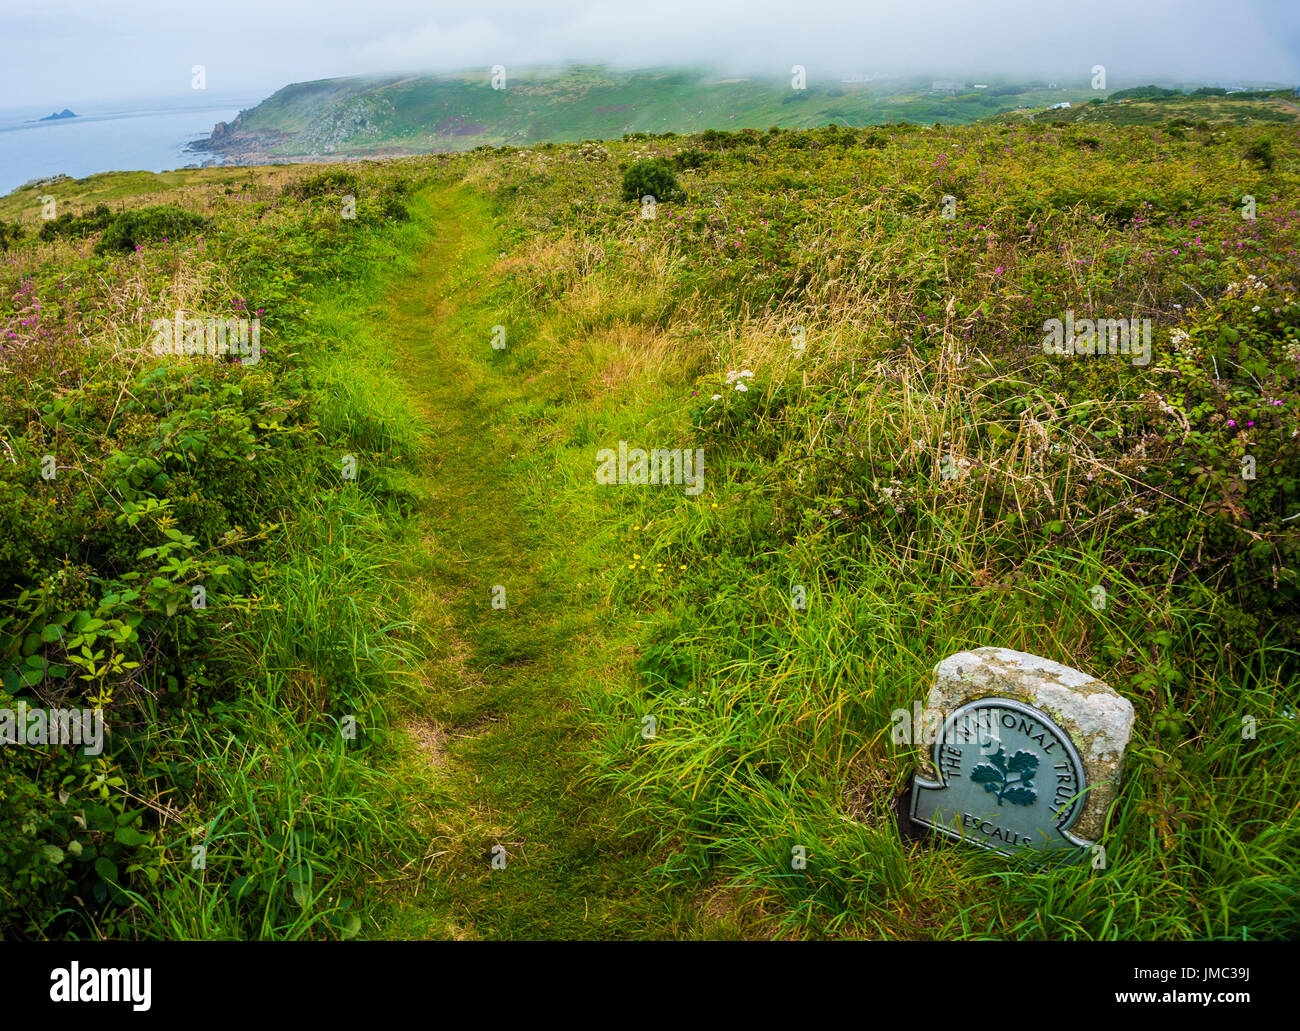 Wide angle shot of country and coast landscape with The National Trust Escalls sign, Cornwall, England Stock Photo